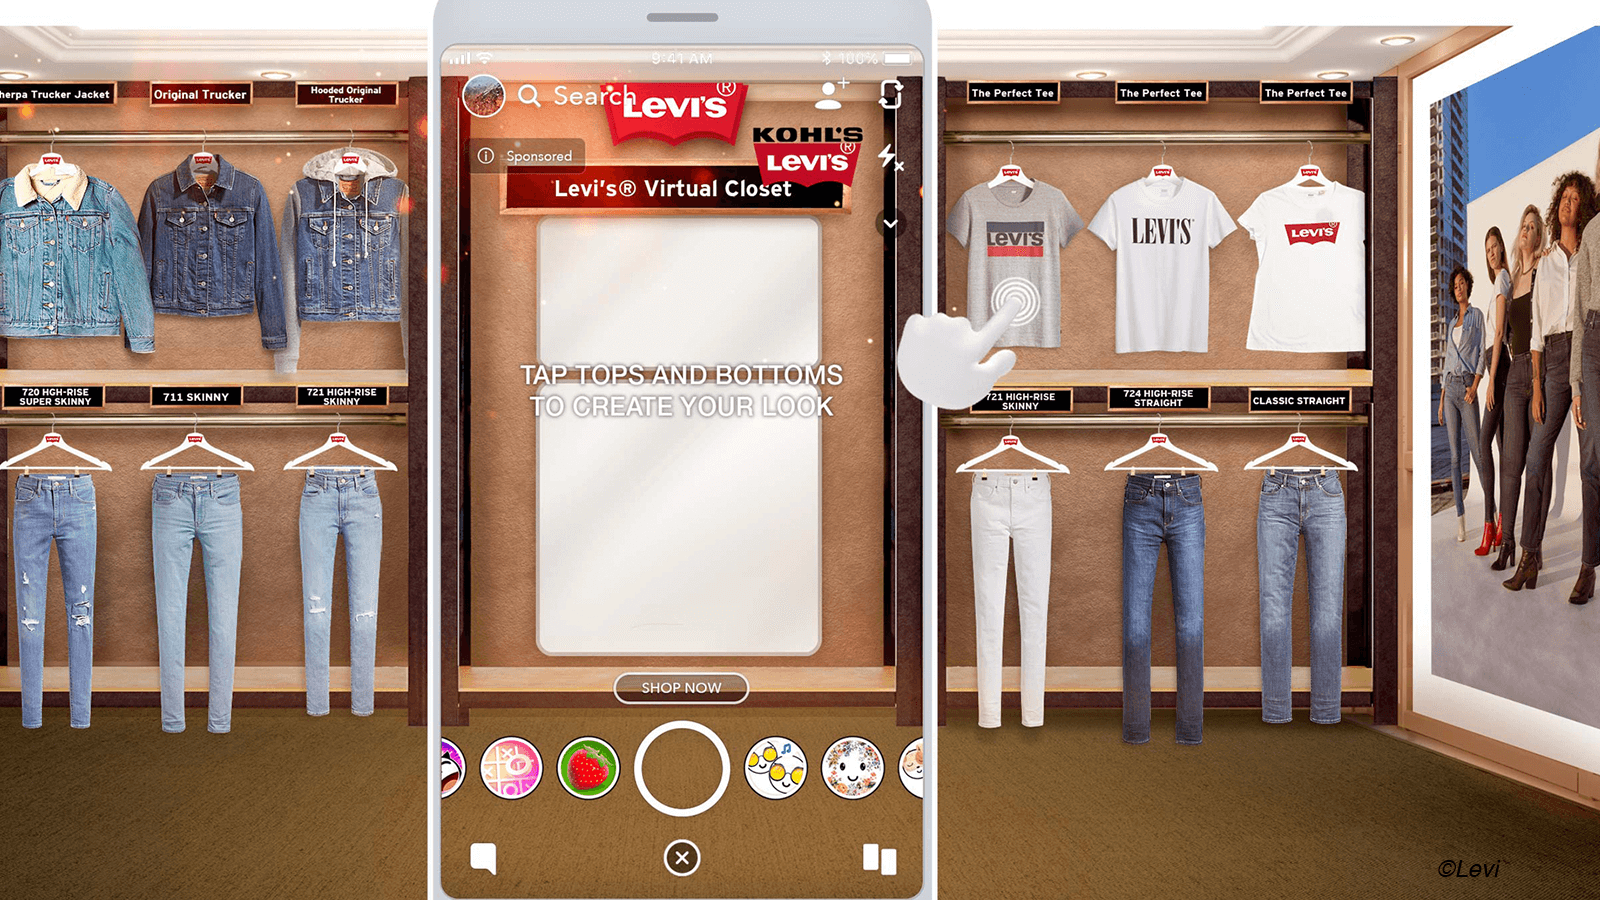 https://www.levistrauss.com/2020/09/03/levis-goes-back-to-school-with-new-approach/